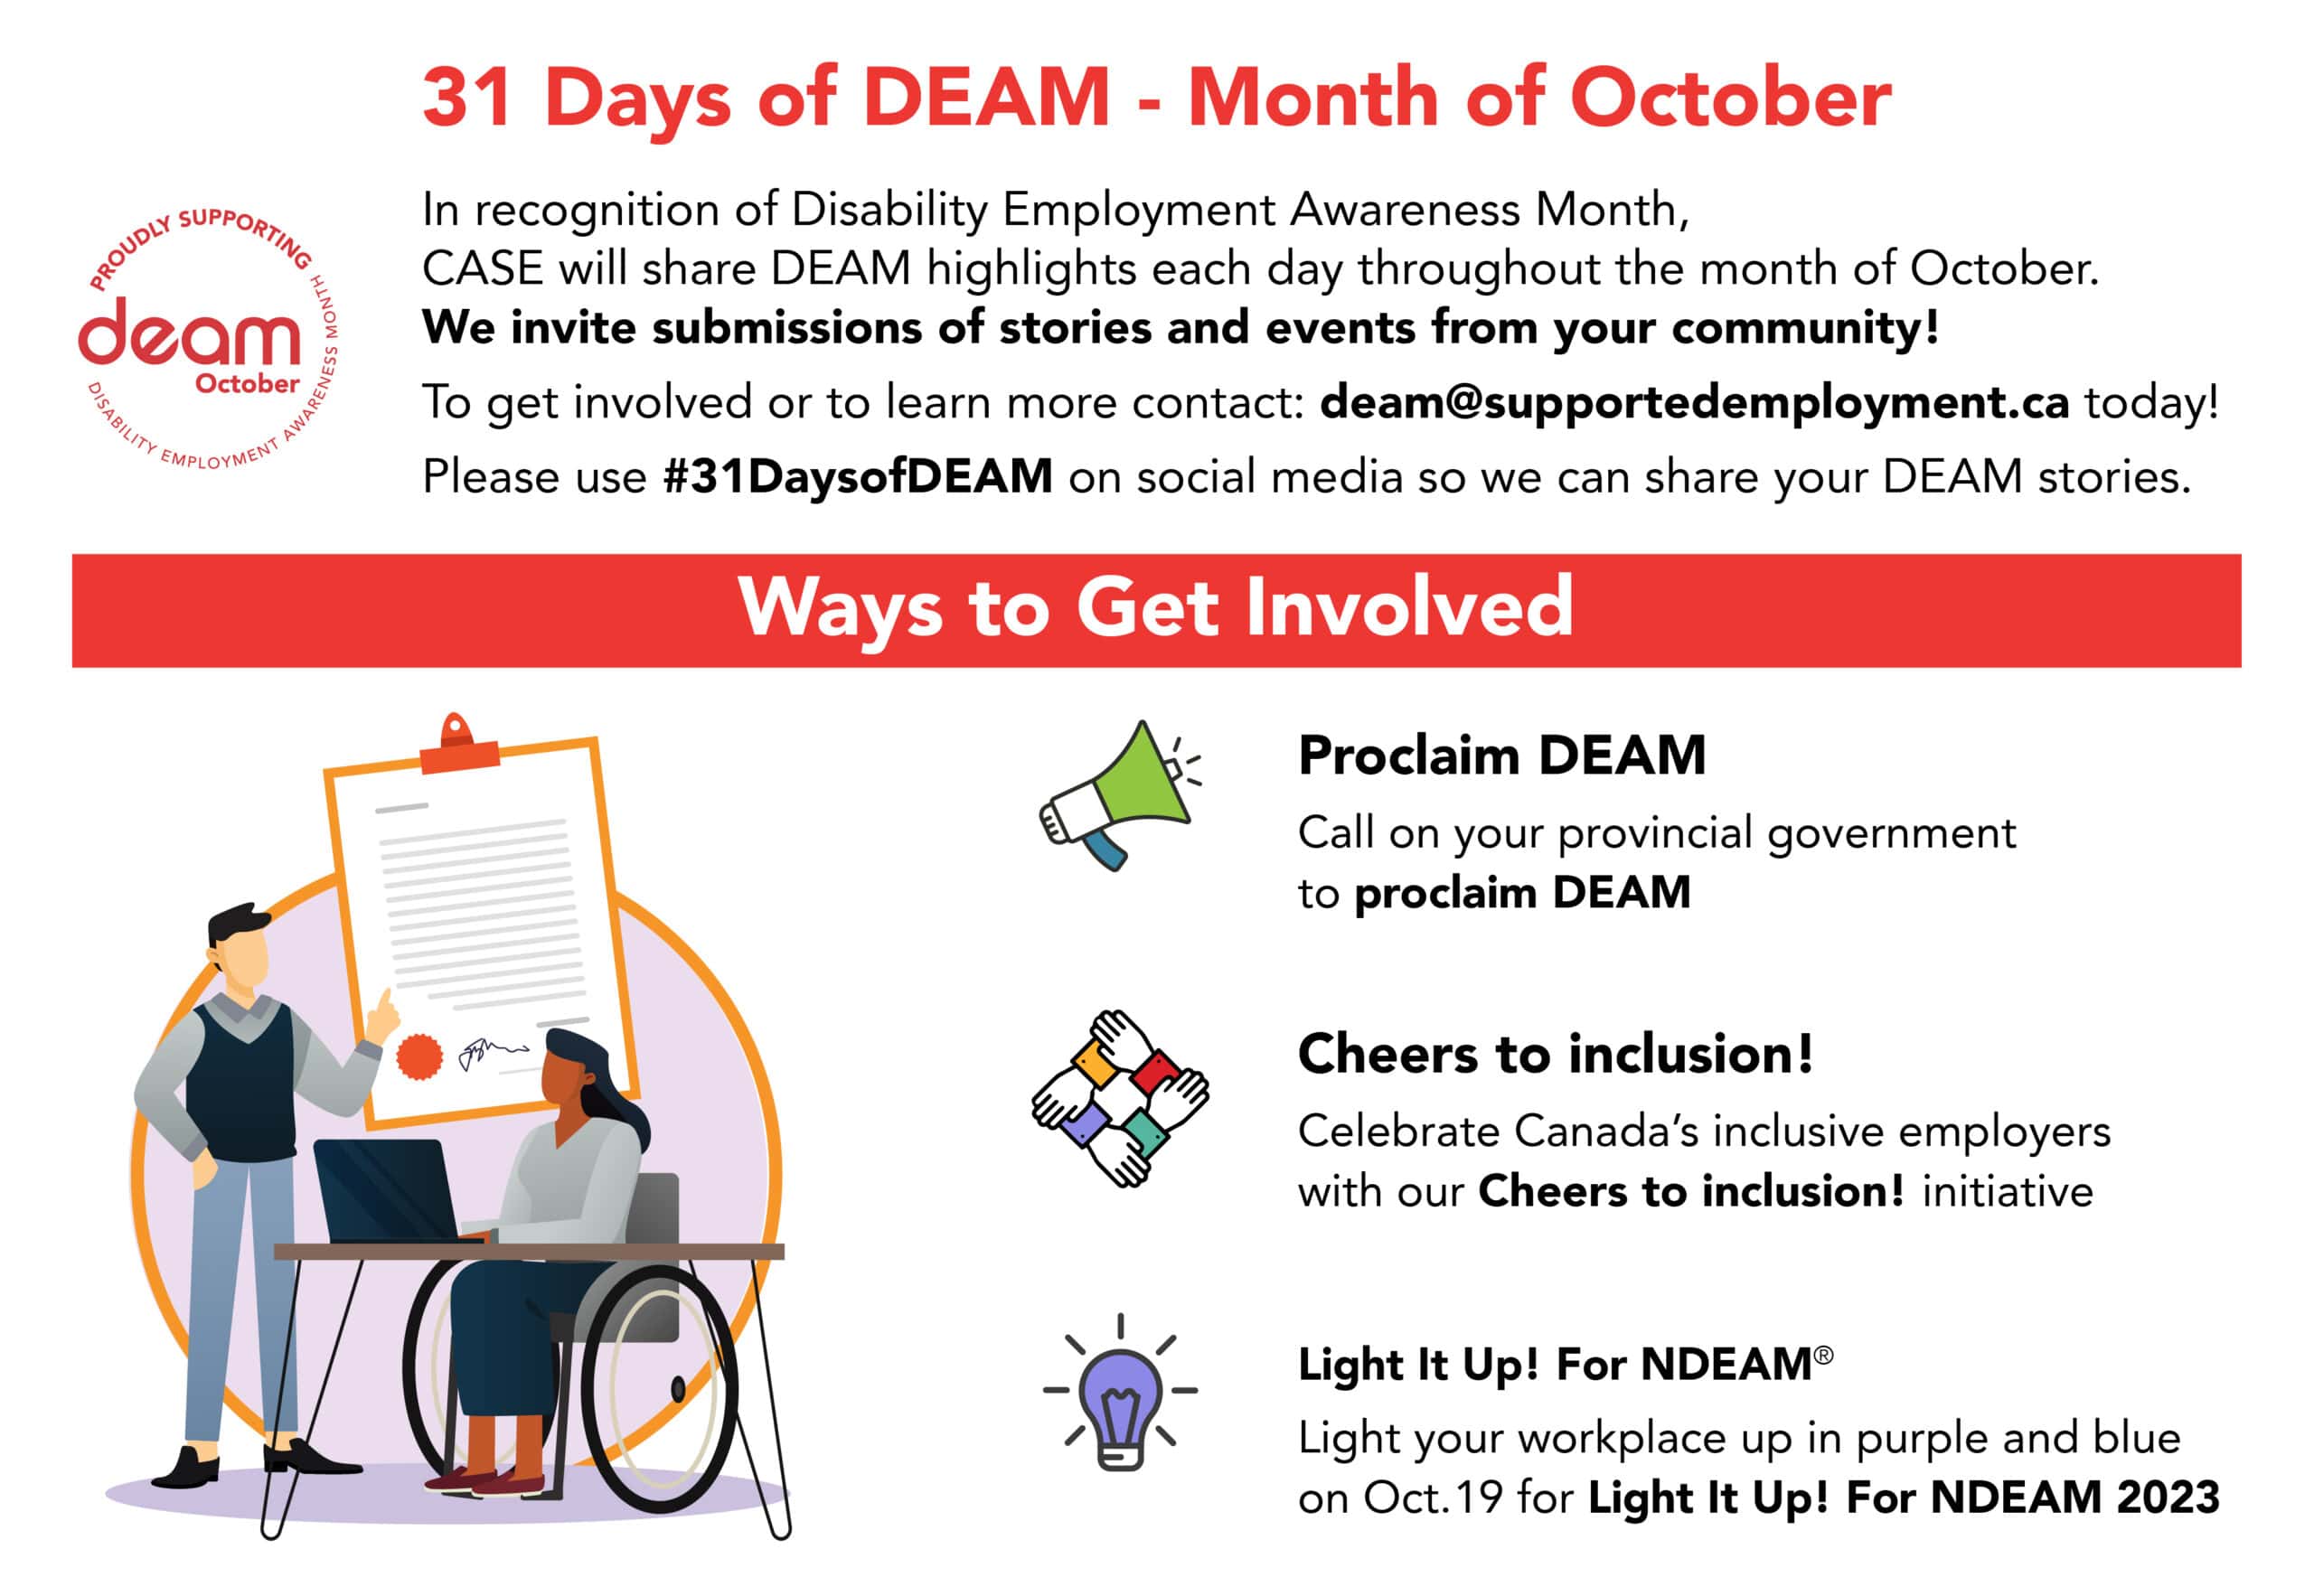 Graphic with text: 31 Days of DEAM - Month of October - CASE will share DEAM highlights every day in October. We invite submissions of stories/events from your community! Contact: deam@supportedemployment.ca. Please use #31DaysofDEAM on social media so we can share your stories. Ways to Get Involved: Call on your provincial government to proclaim DEAM. Celebrate Canada's inclusive employers with our Cheers to Inclusion! initiative. Light your workplace up in purple and blue on Oct. 19 for Light It Up! For NDEAM 2023.